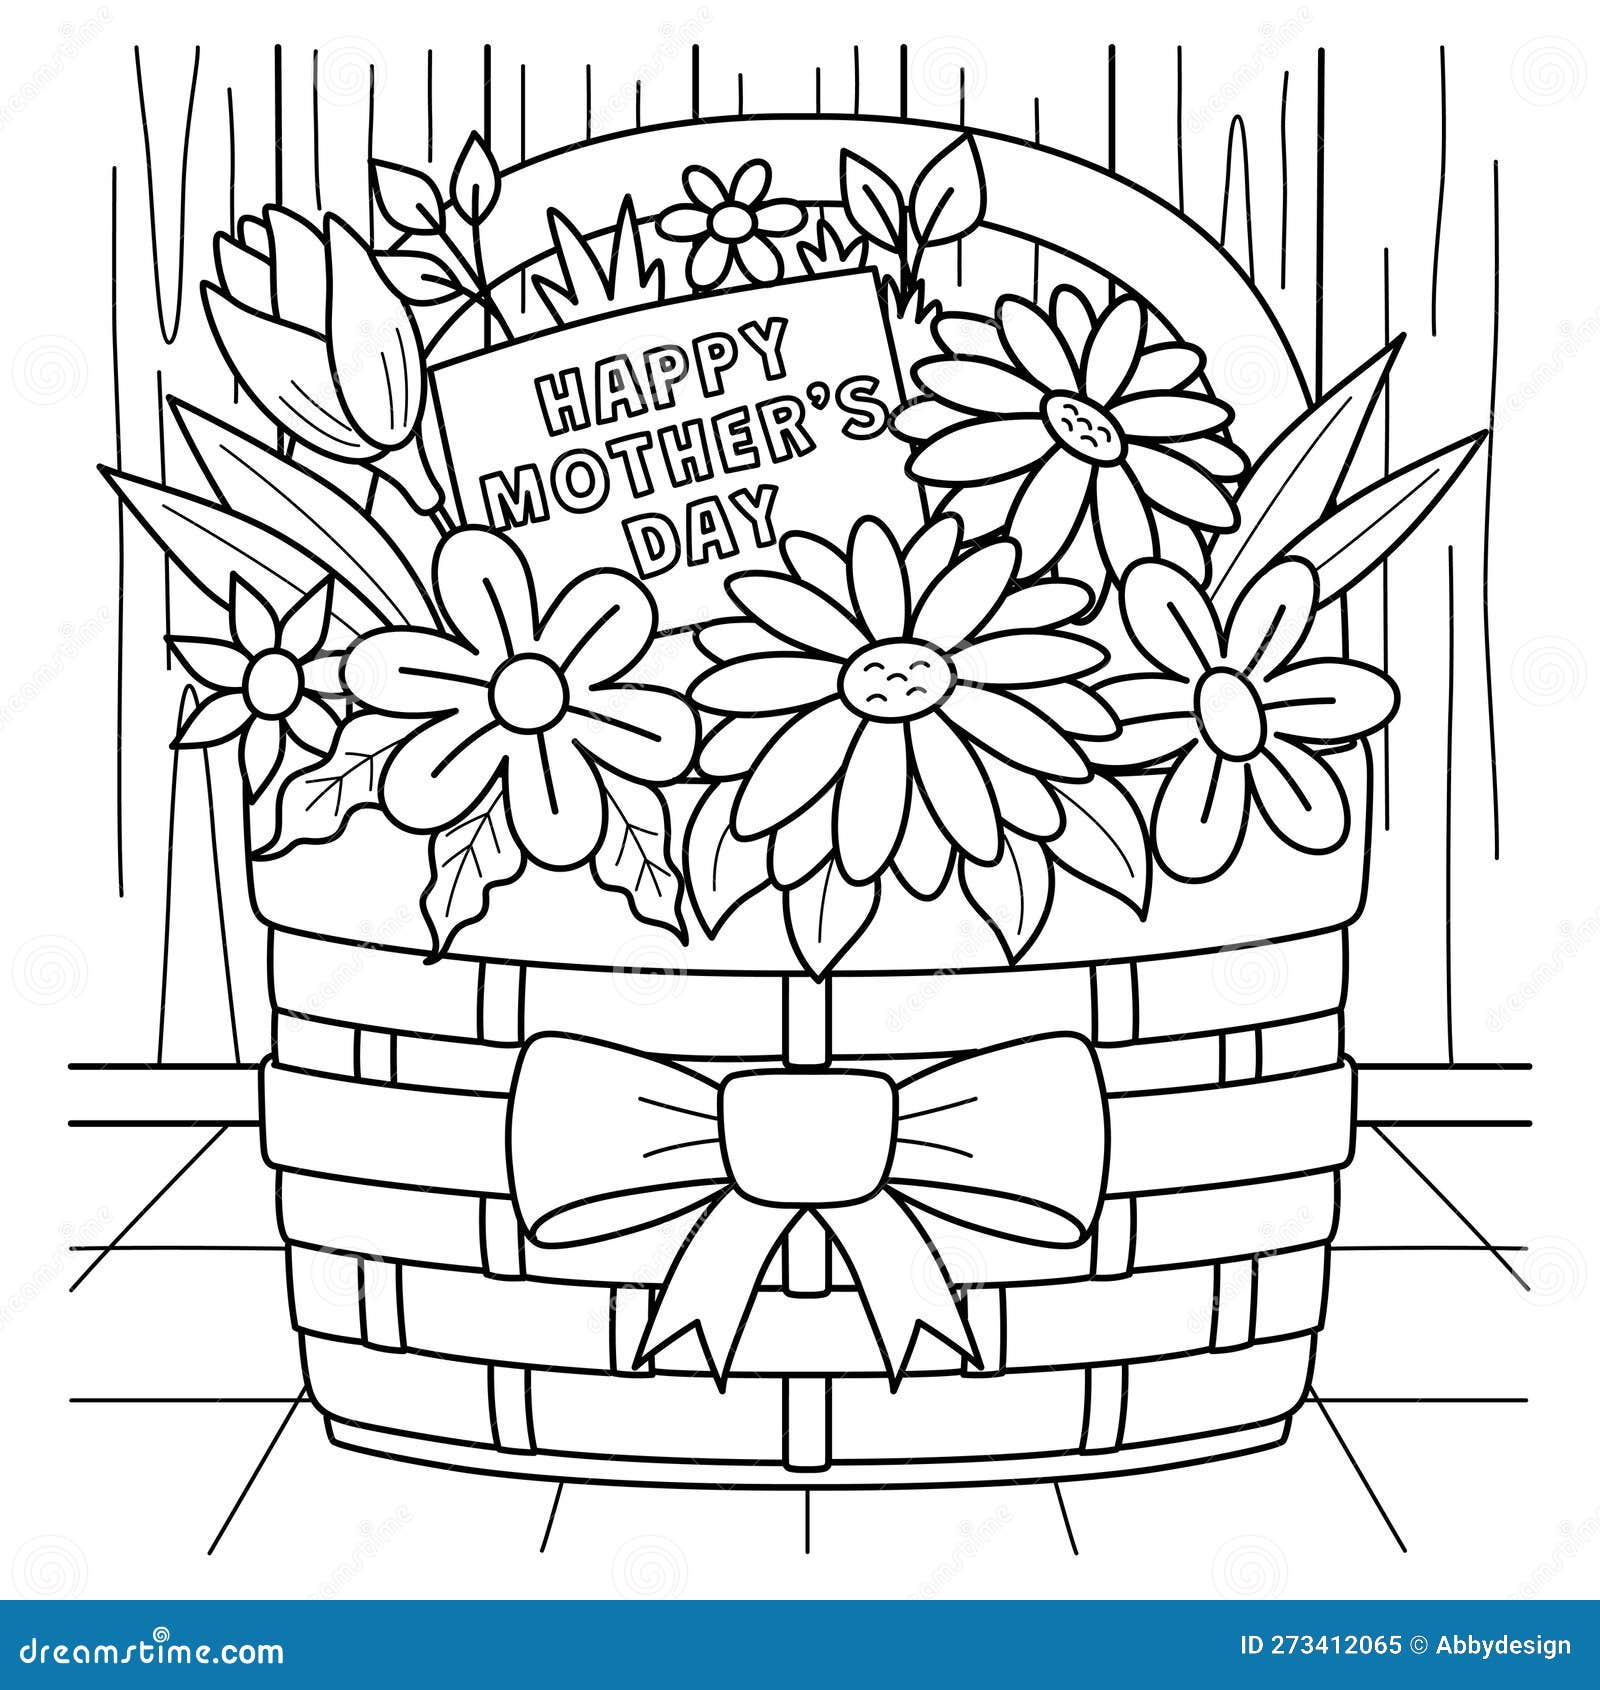 Flower Line Work Baskets Machine Embroidery - Pam's Embroidery Designs